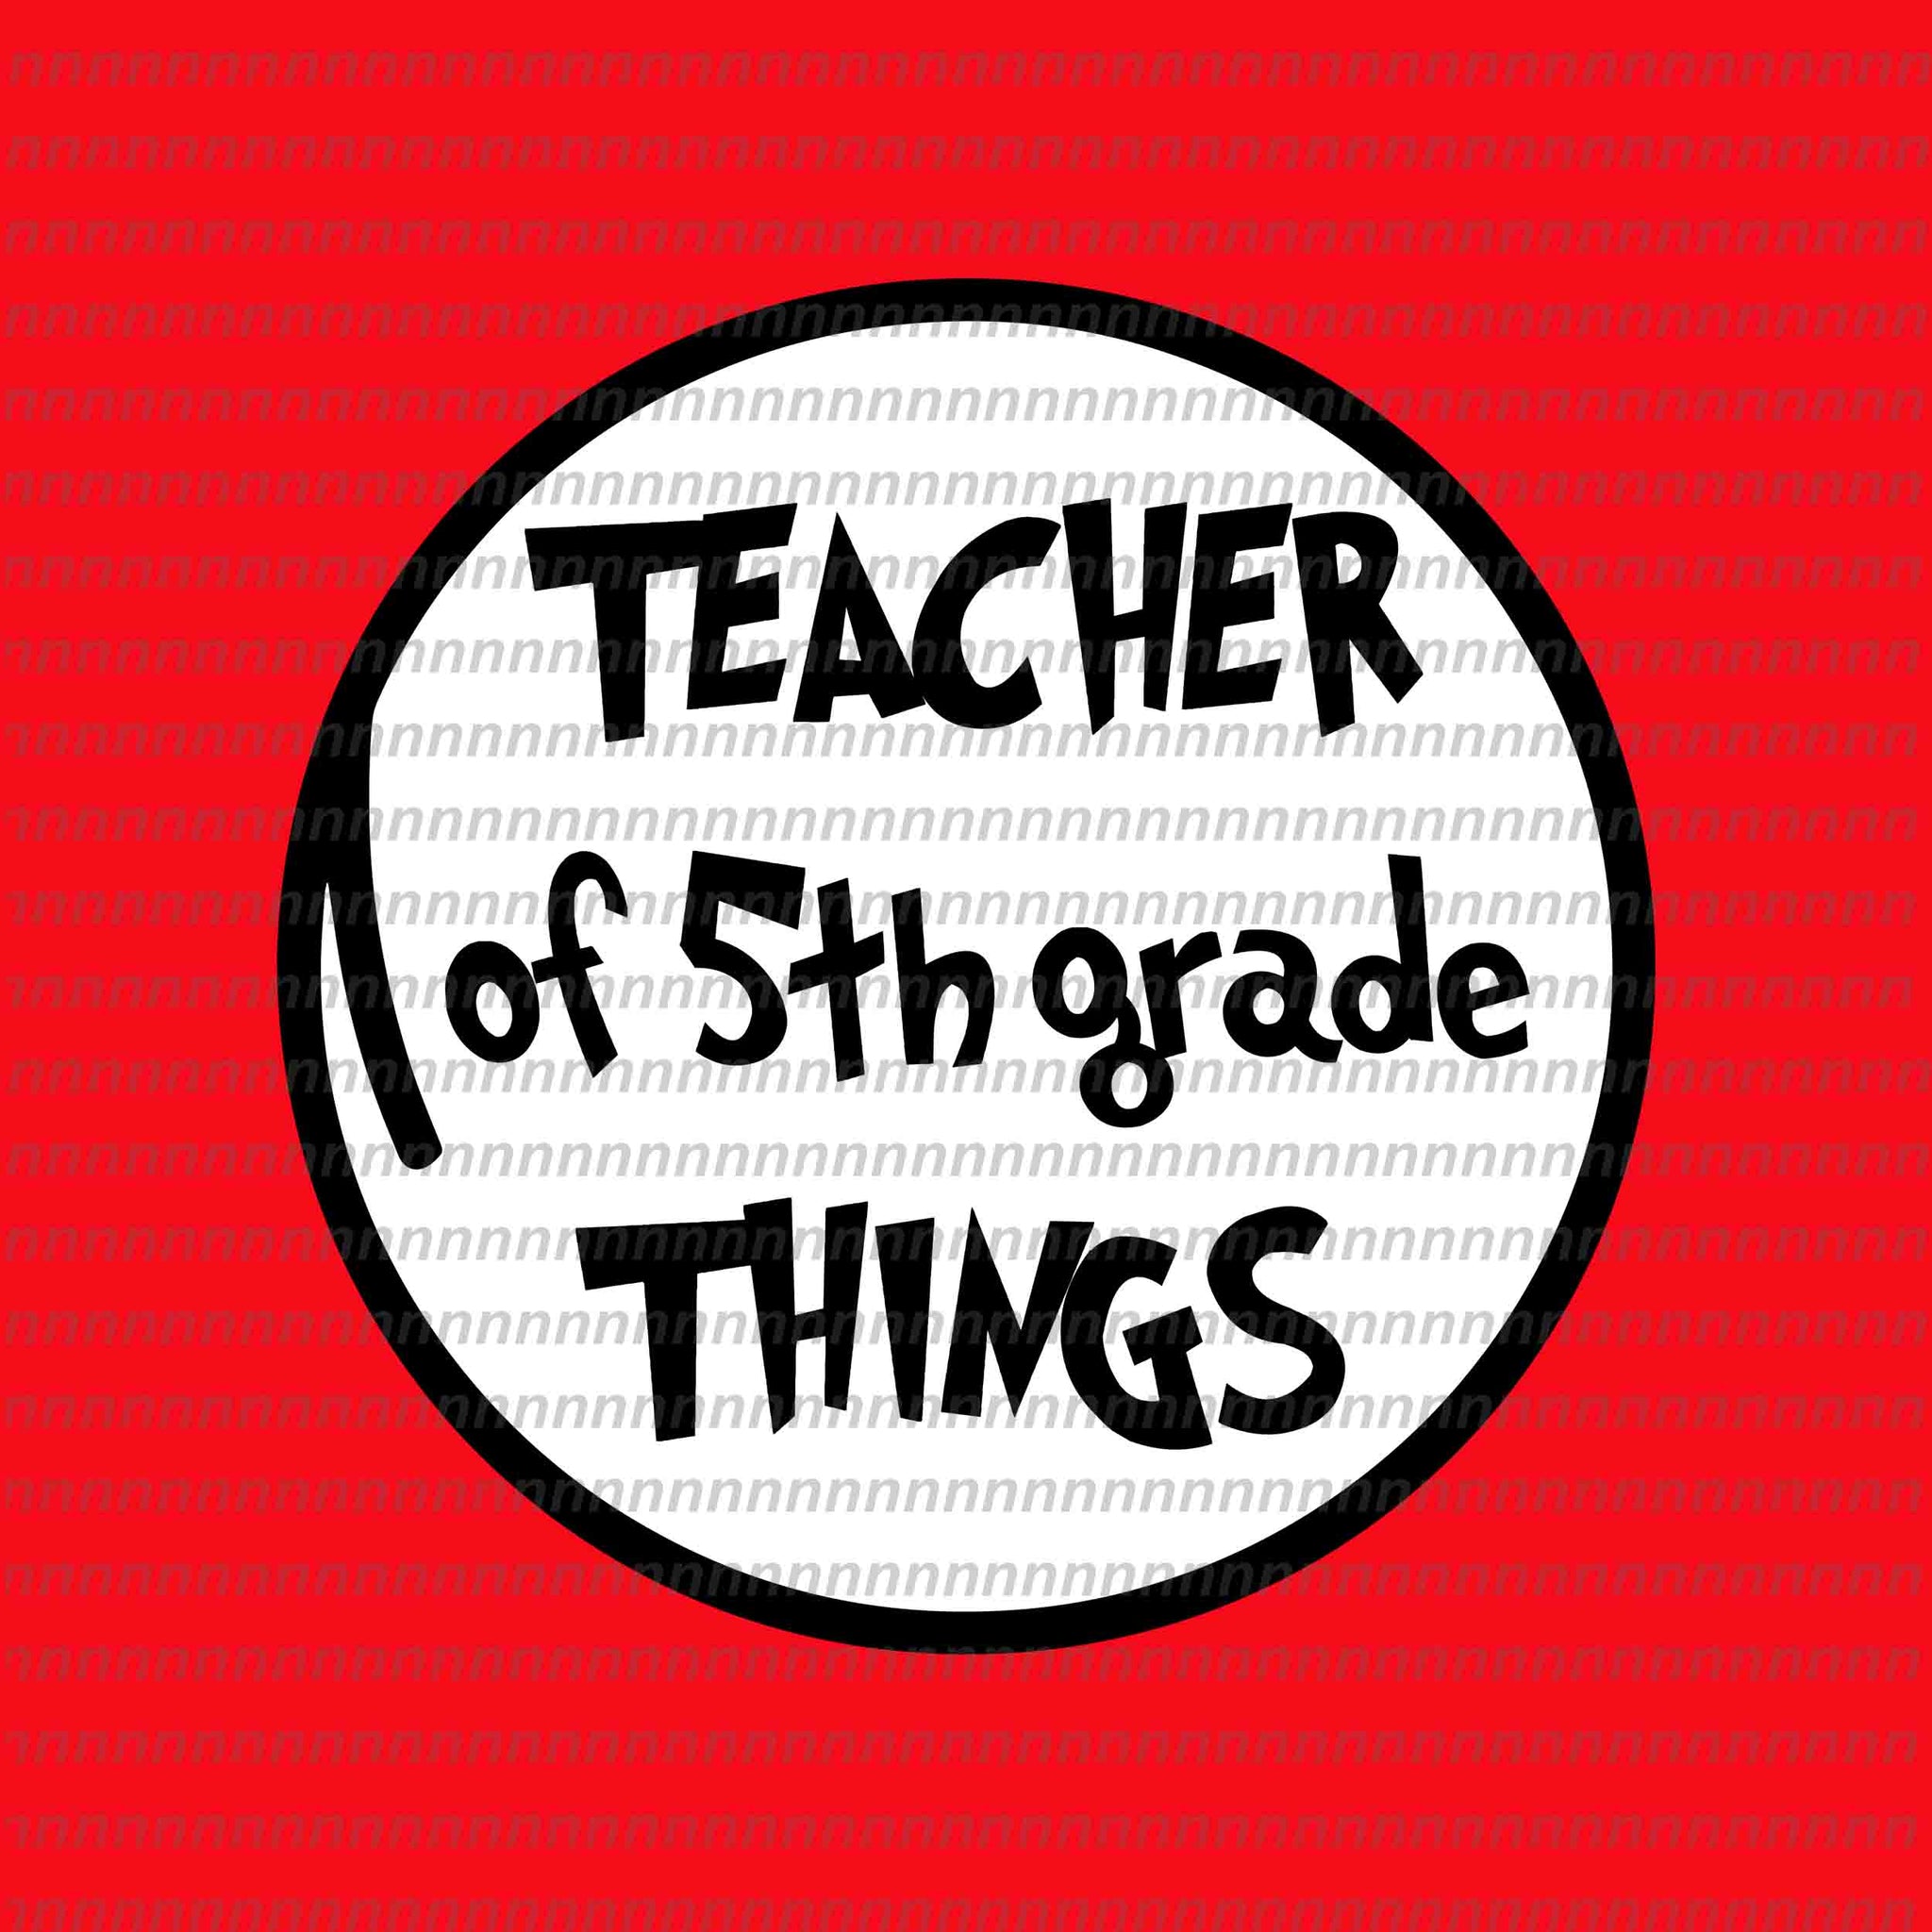 Teacher of 5th grade things svg, dr seuss svg,dr seuss vector, dr seuss quote, dr seuss design, Cat in the hat svg, thing 1 thing 2 thing 3, svg, png, dxf, eps file